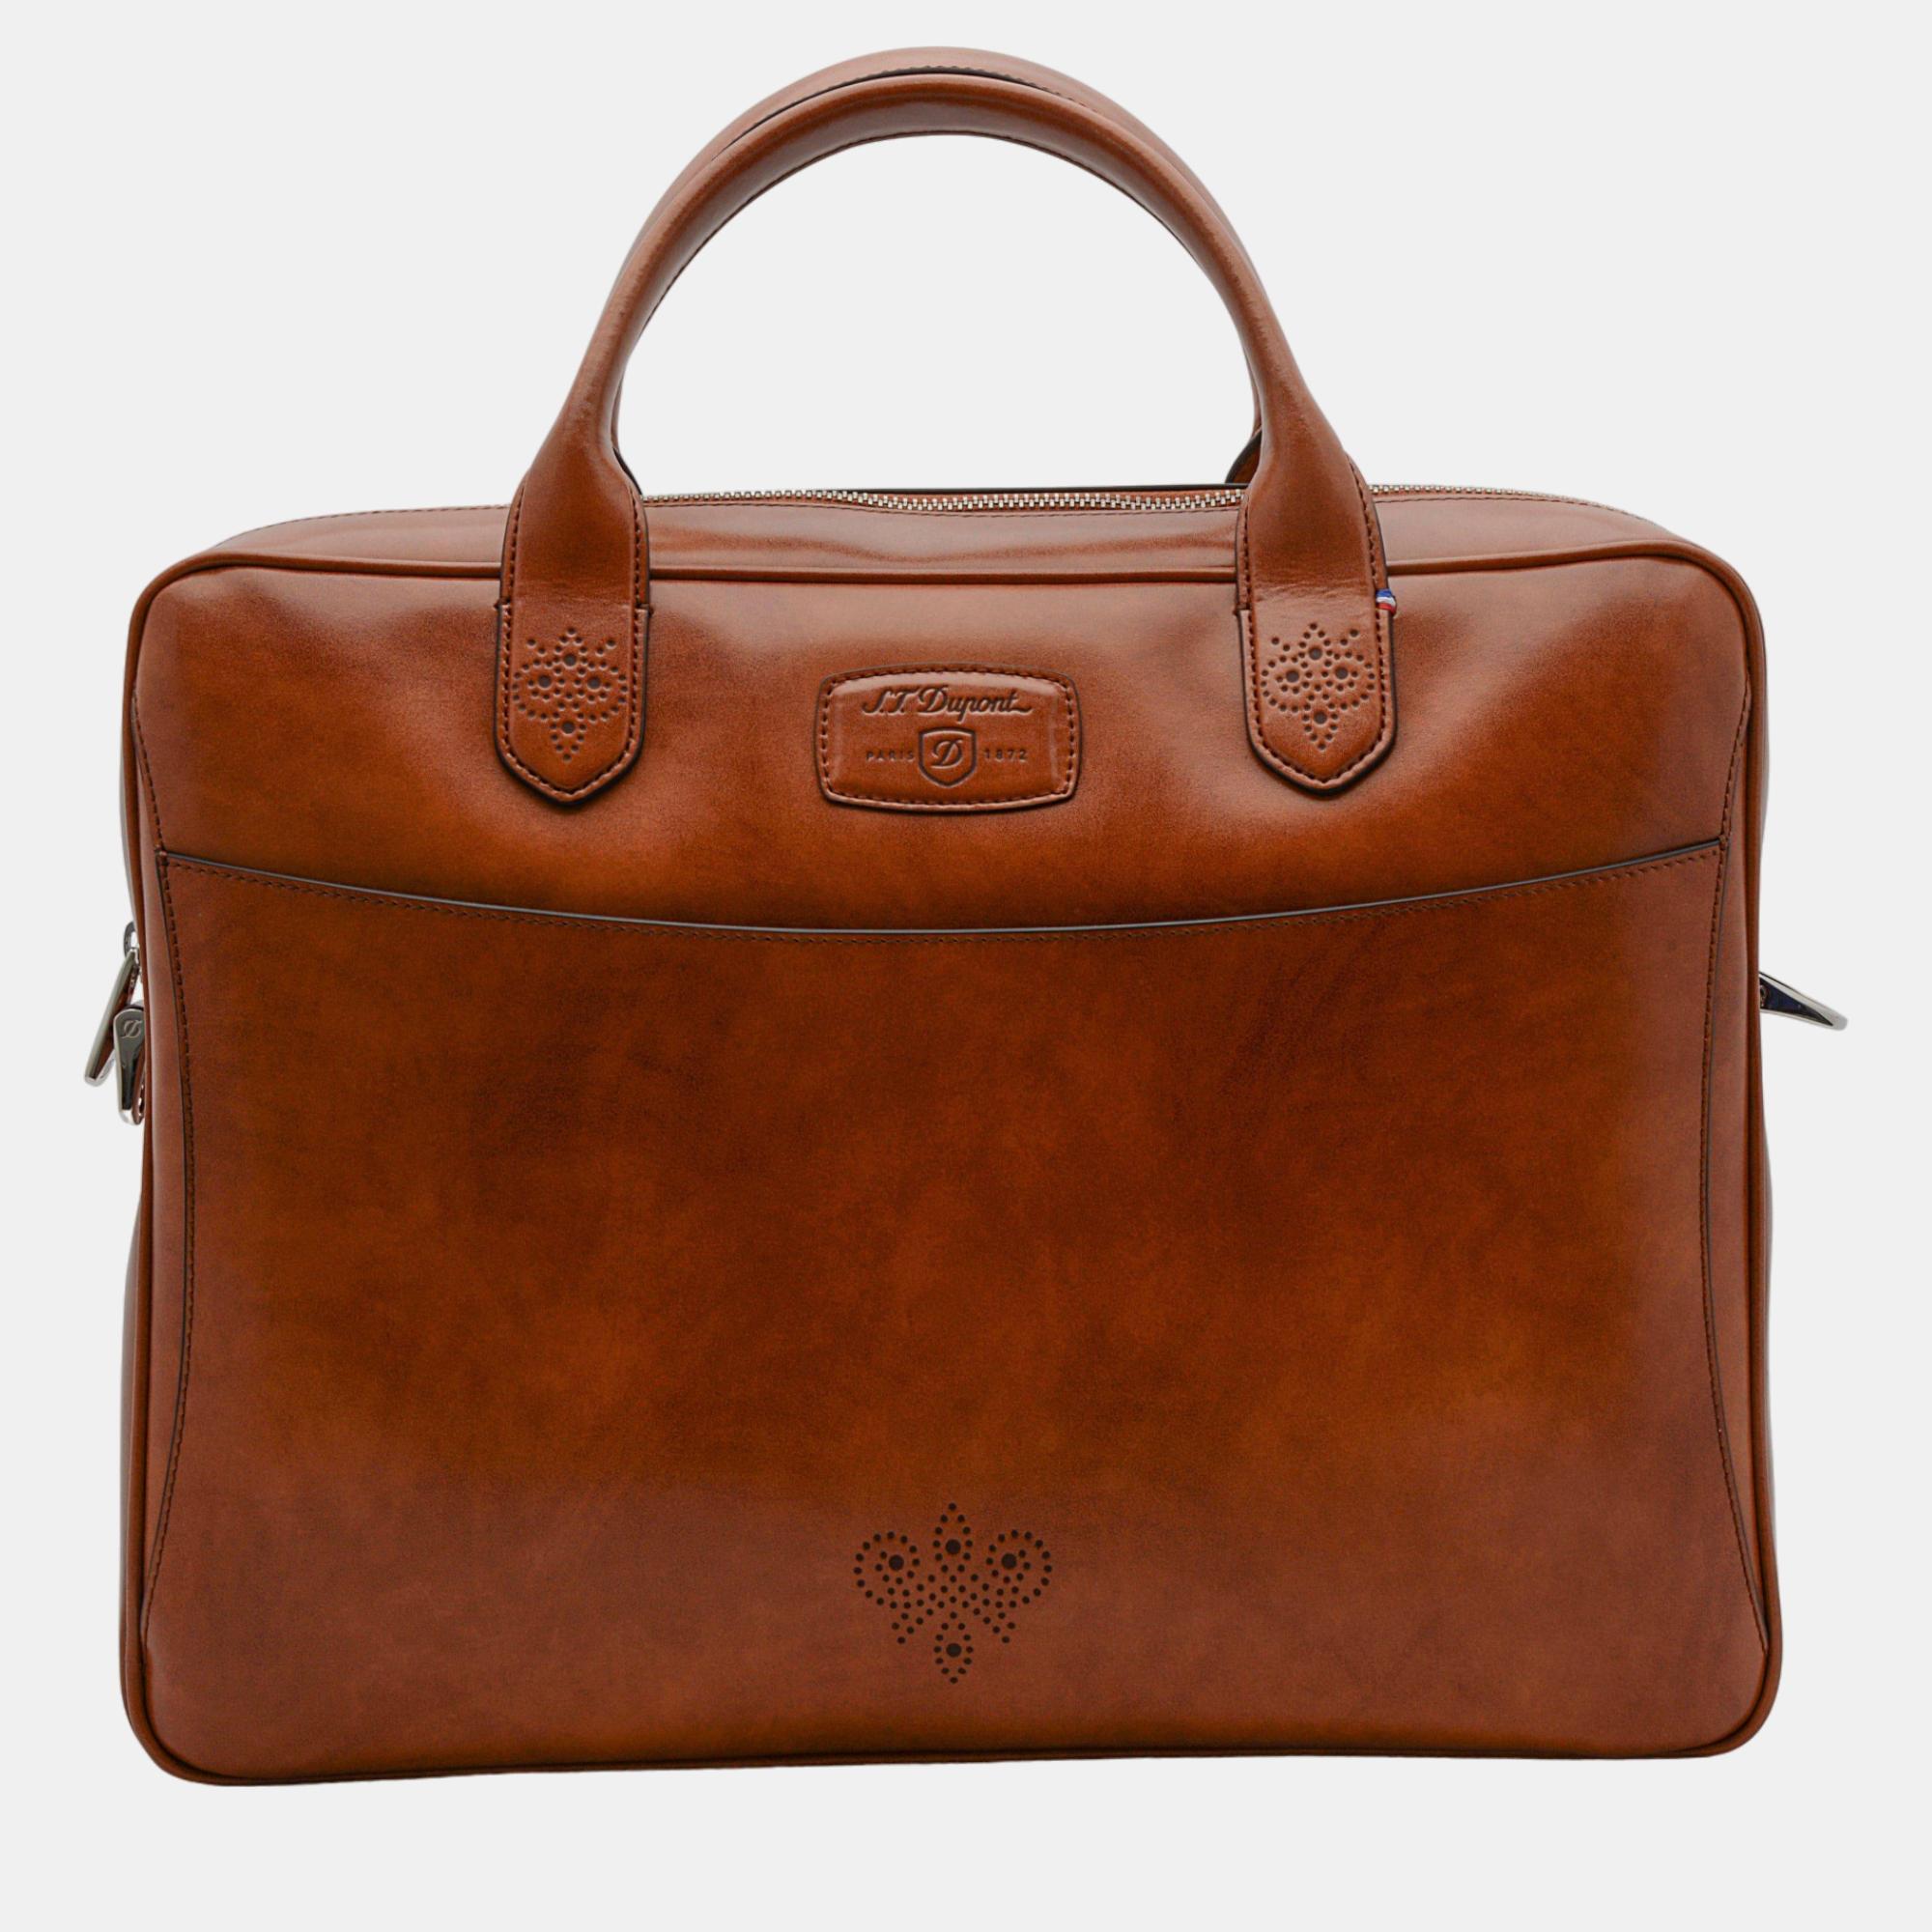 Pre-owned St Dupont Derby Brown Leather Portfolio Laptop Briefcase